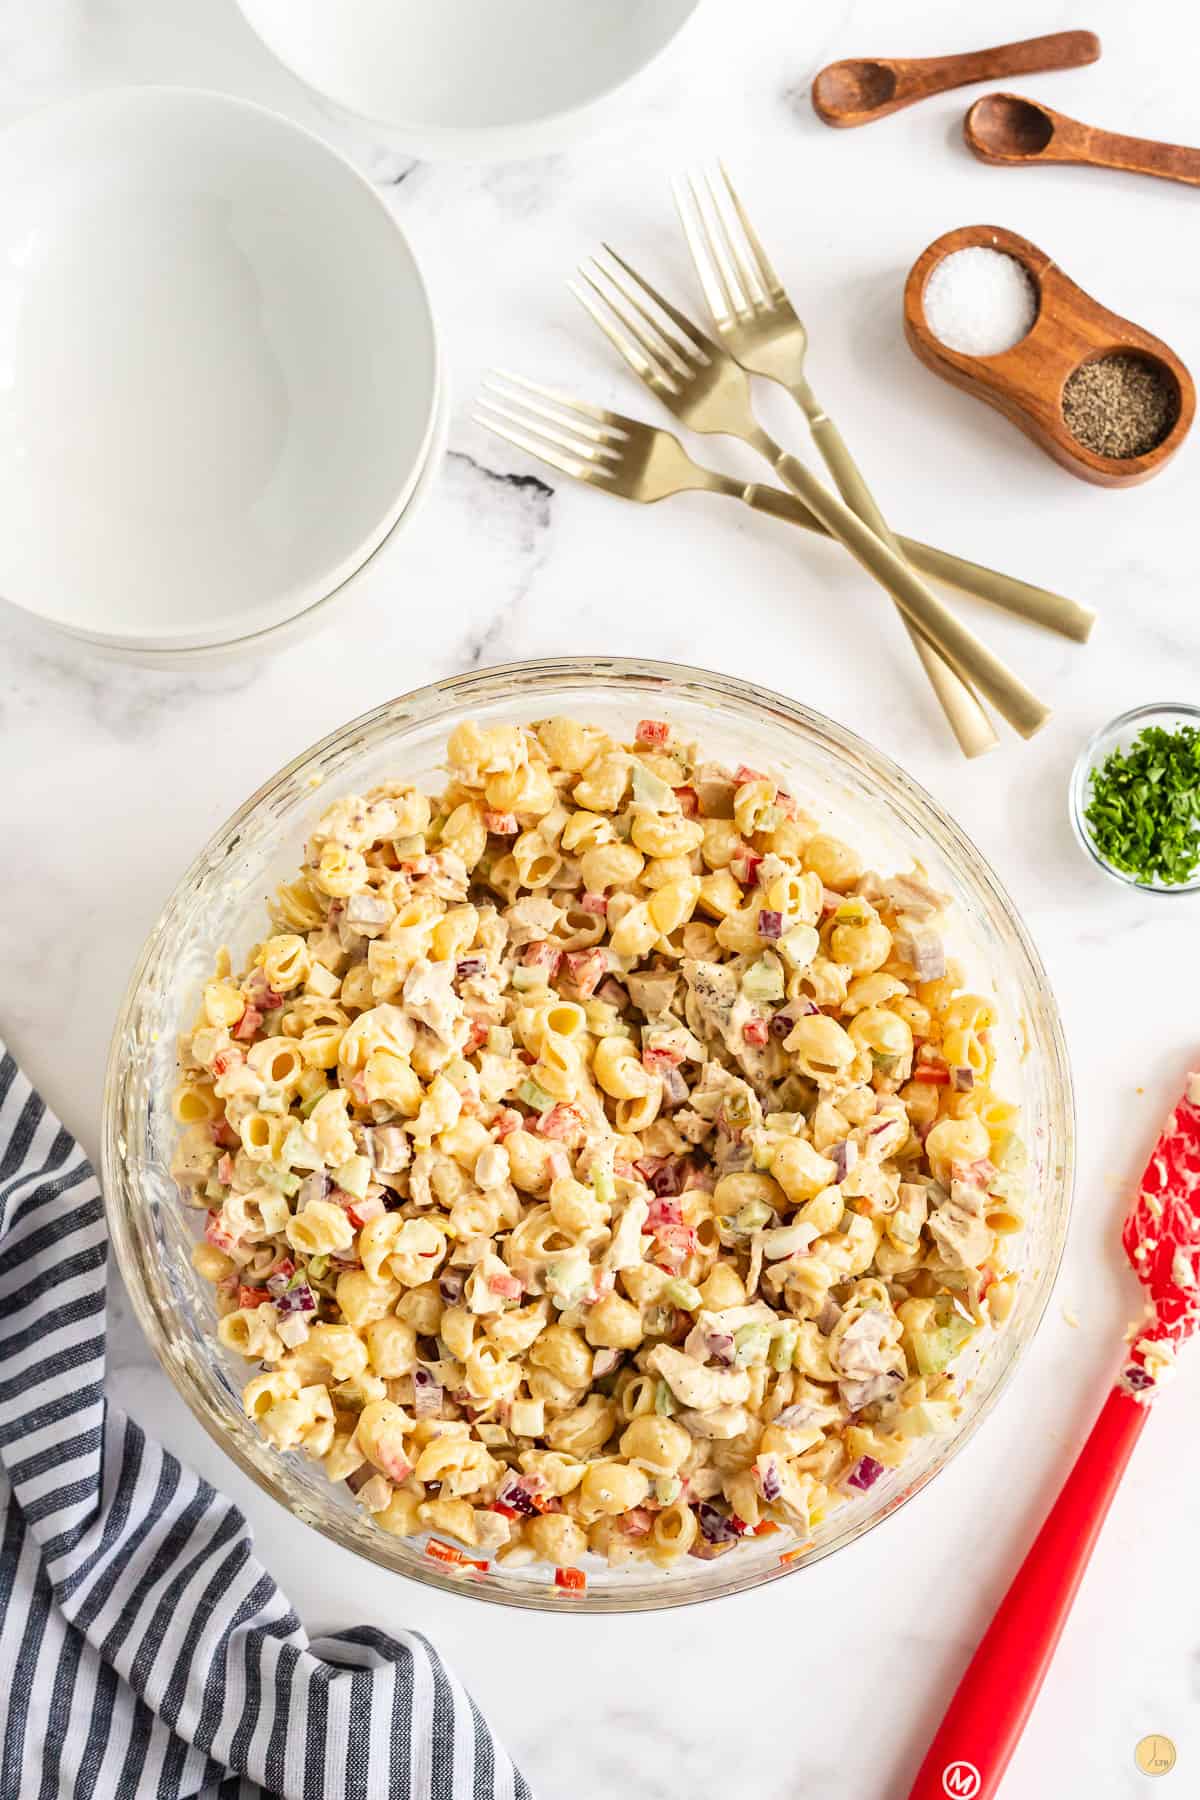 chicken macaroni salad in a bowl